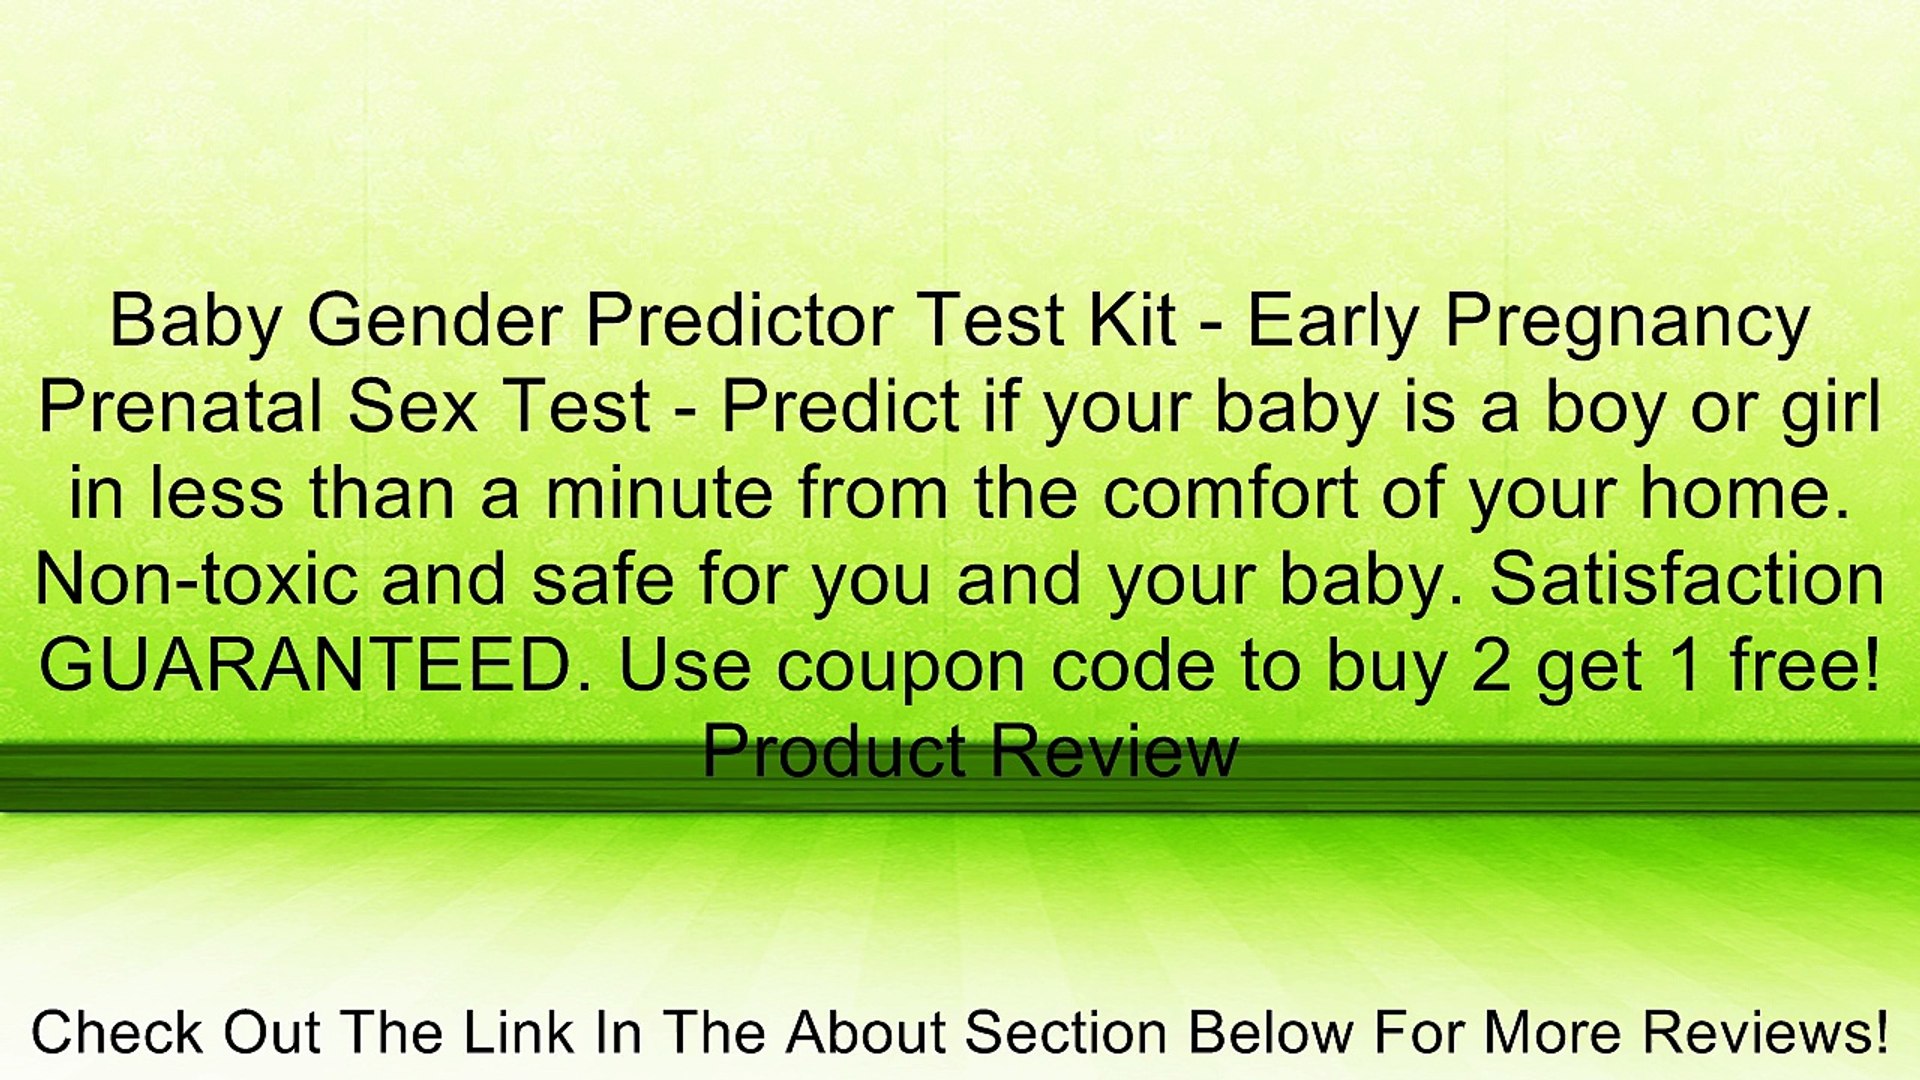 Baby Gender Predictor Test Kit - Early Pregnancy Prenatal Sex Test pic picture